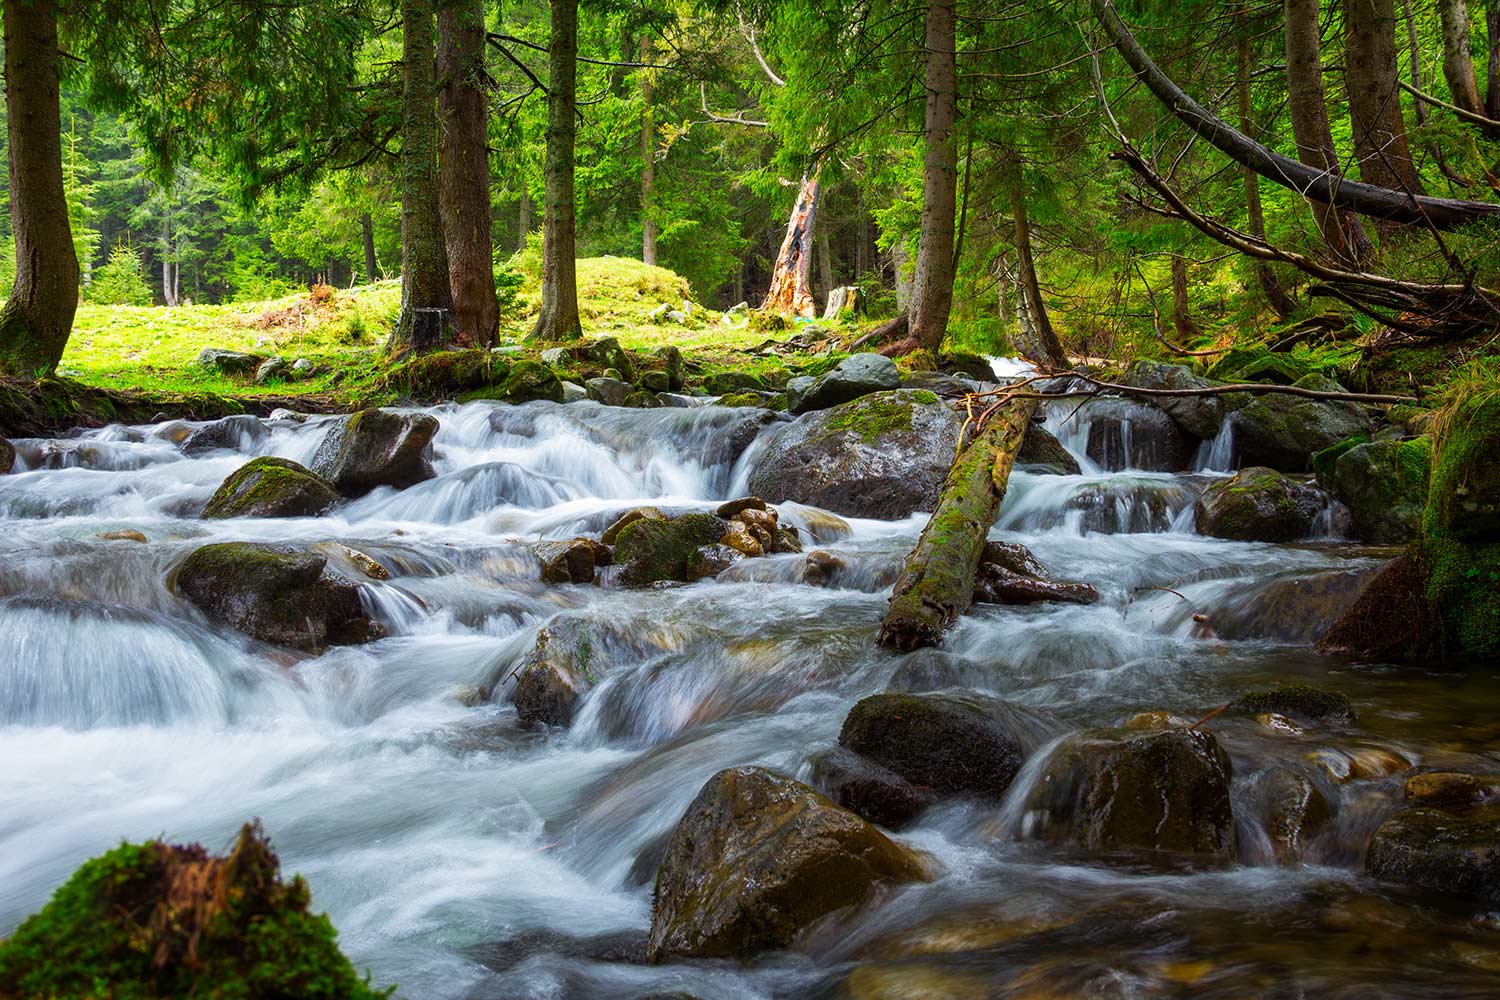 Mountain river in lush forest.